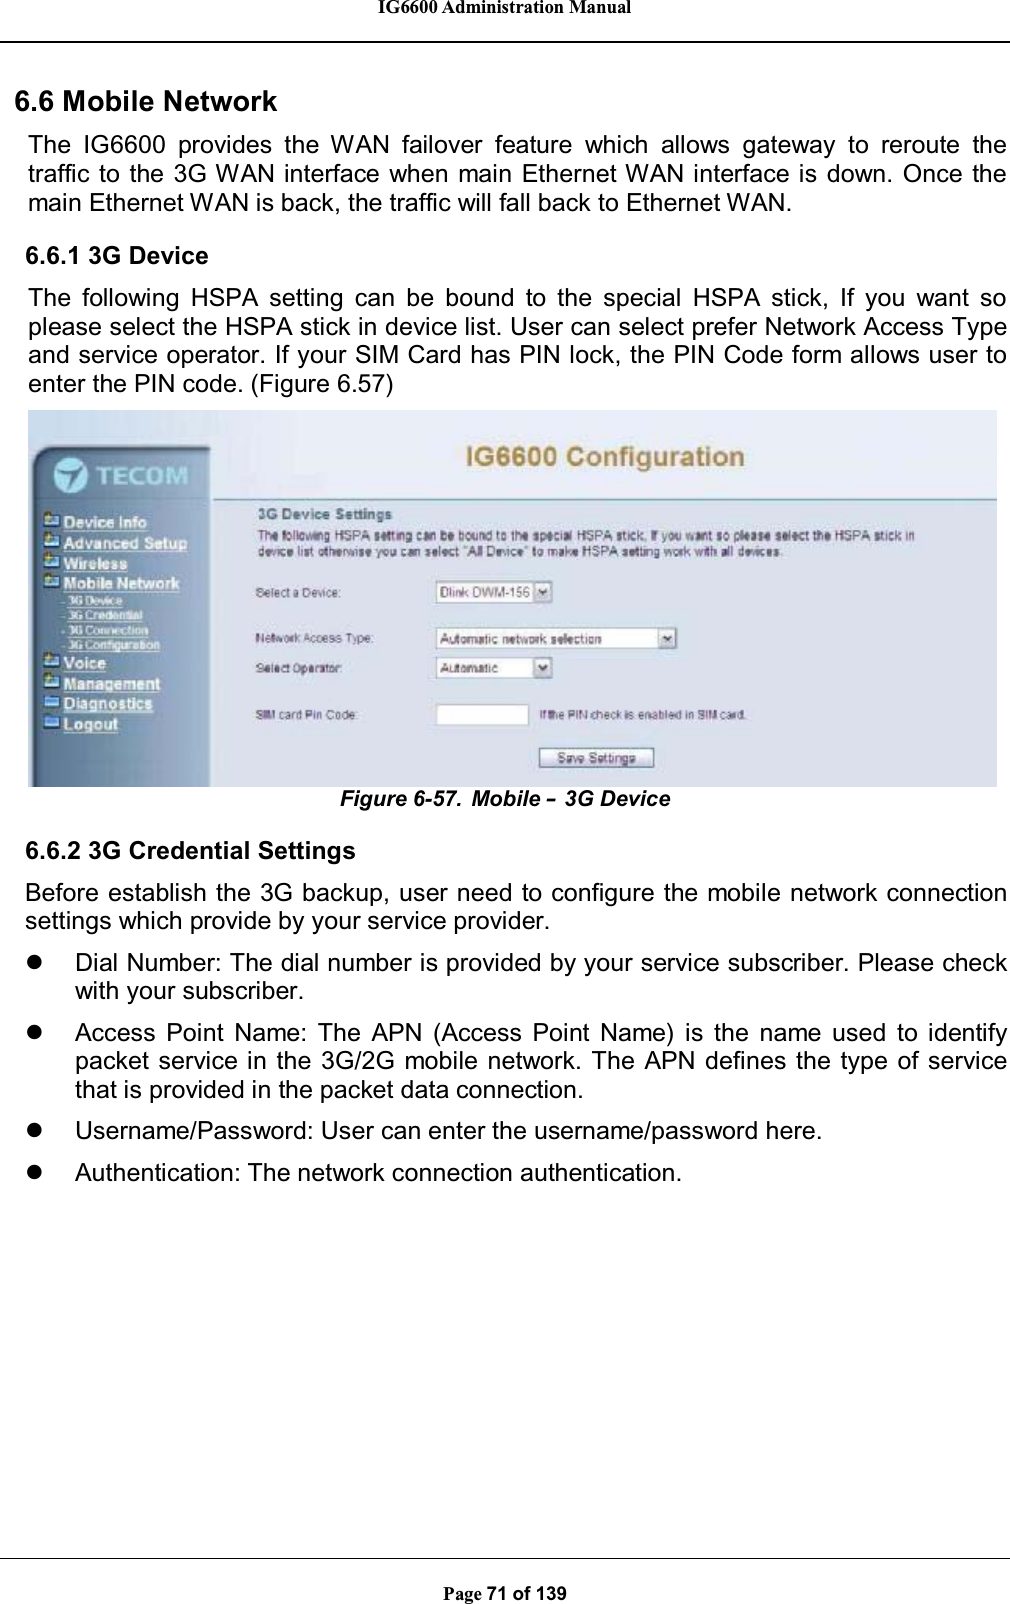 IG6600 Administration ManualPage 71 of 1396.6MobileNetworkThe IG6600 provides the WAN failover feature which allows gateway to reroute thetraffic to the 3G WAN interface when main Ethernet WAN interface is down. Once themain Ethernet WAN is back, the traffic will fall back to Ethernet WAN.6.6.1 3G DeviceThe following HSPA setting can be bound to the special HSPA stick, If you want soplease select the HSPA stick in device list. User can select prefer Network Access Typeand service operator. If your SIM Card has PIN lock, the PIN Code form allows user toenter the PIN code. (Figure 6.57)Figure 6-57. Mobile –3G Device6.6.2 3G Credential SettingsBefore establish the 3G backup, user need to configure the mobile network connectionsettings which provide by your service provider.zDial Number: The dial number is provided by your service subscriber. Please checkwith your subscriber.zAccess Point Name: The APN (Access Point Name) is the name used to identifypacket service in the 3G/2G mobile network. The APN defines the type of servicethat is provided in the packet data connection.zUsername/Password: User can enter the username/password here.zAuthentication: The network connection authentication.